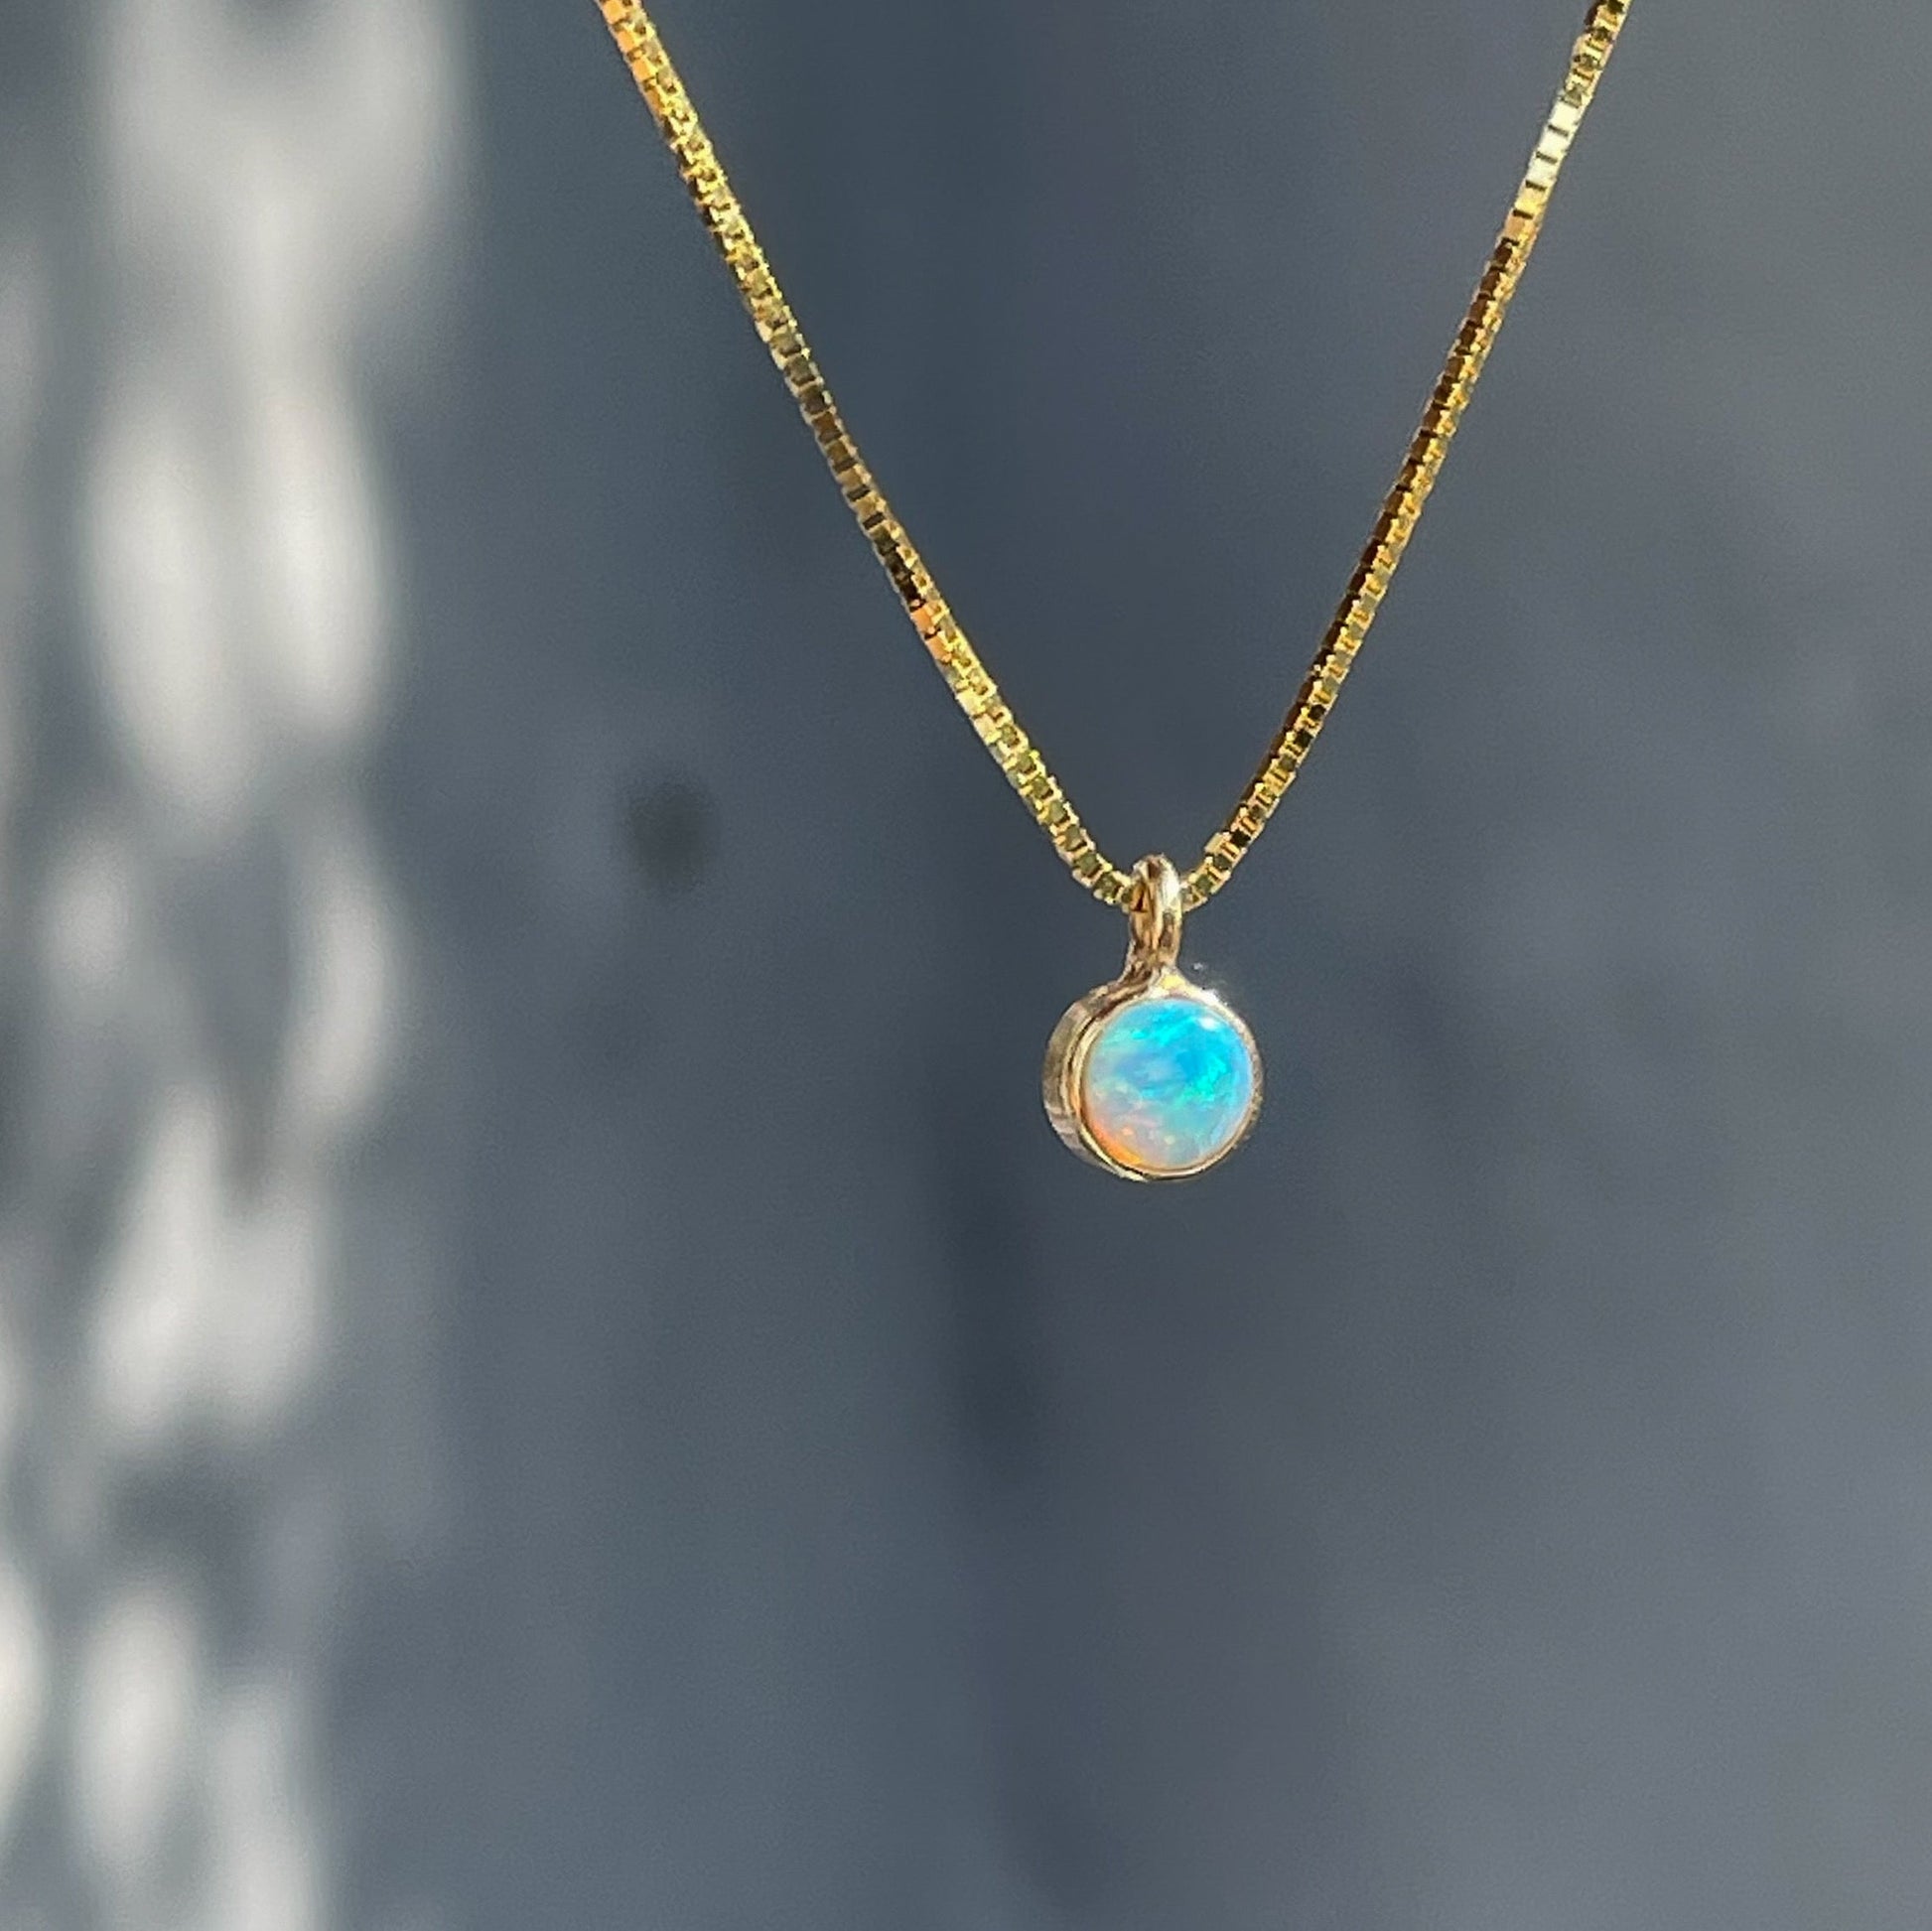 An Australian Opal Necklace by NIXIN Jewelry hangs in front of a grey wall. The dainty opal necklace is made in 14k gold.